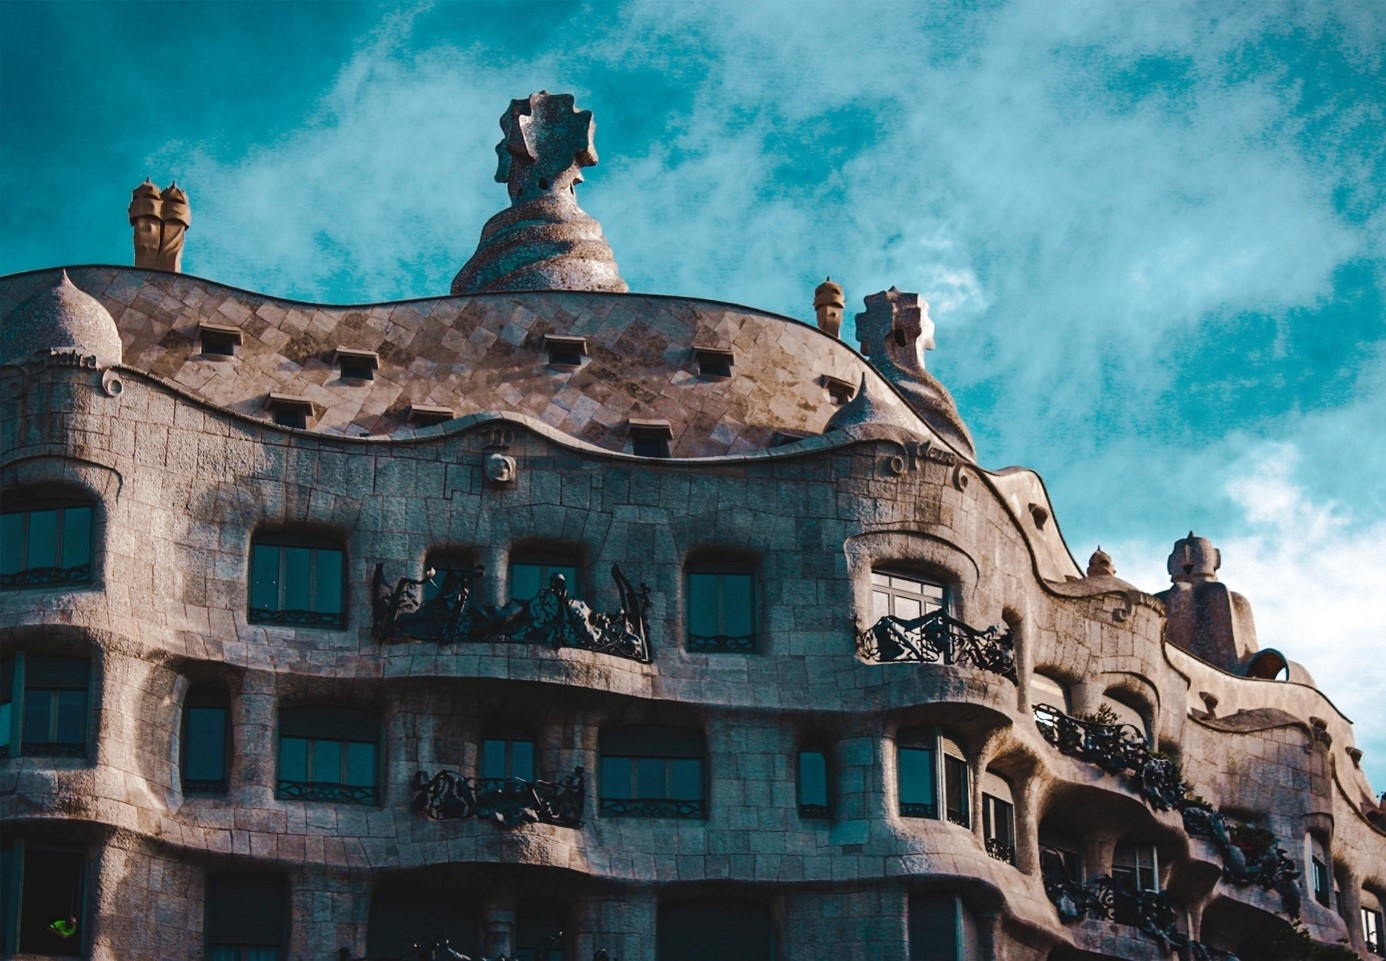 This Gaudí house got its nickname from the stonelike appearance that makes it look like a quarry